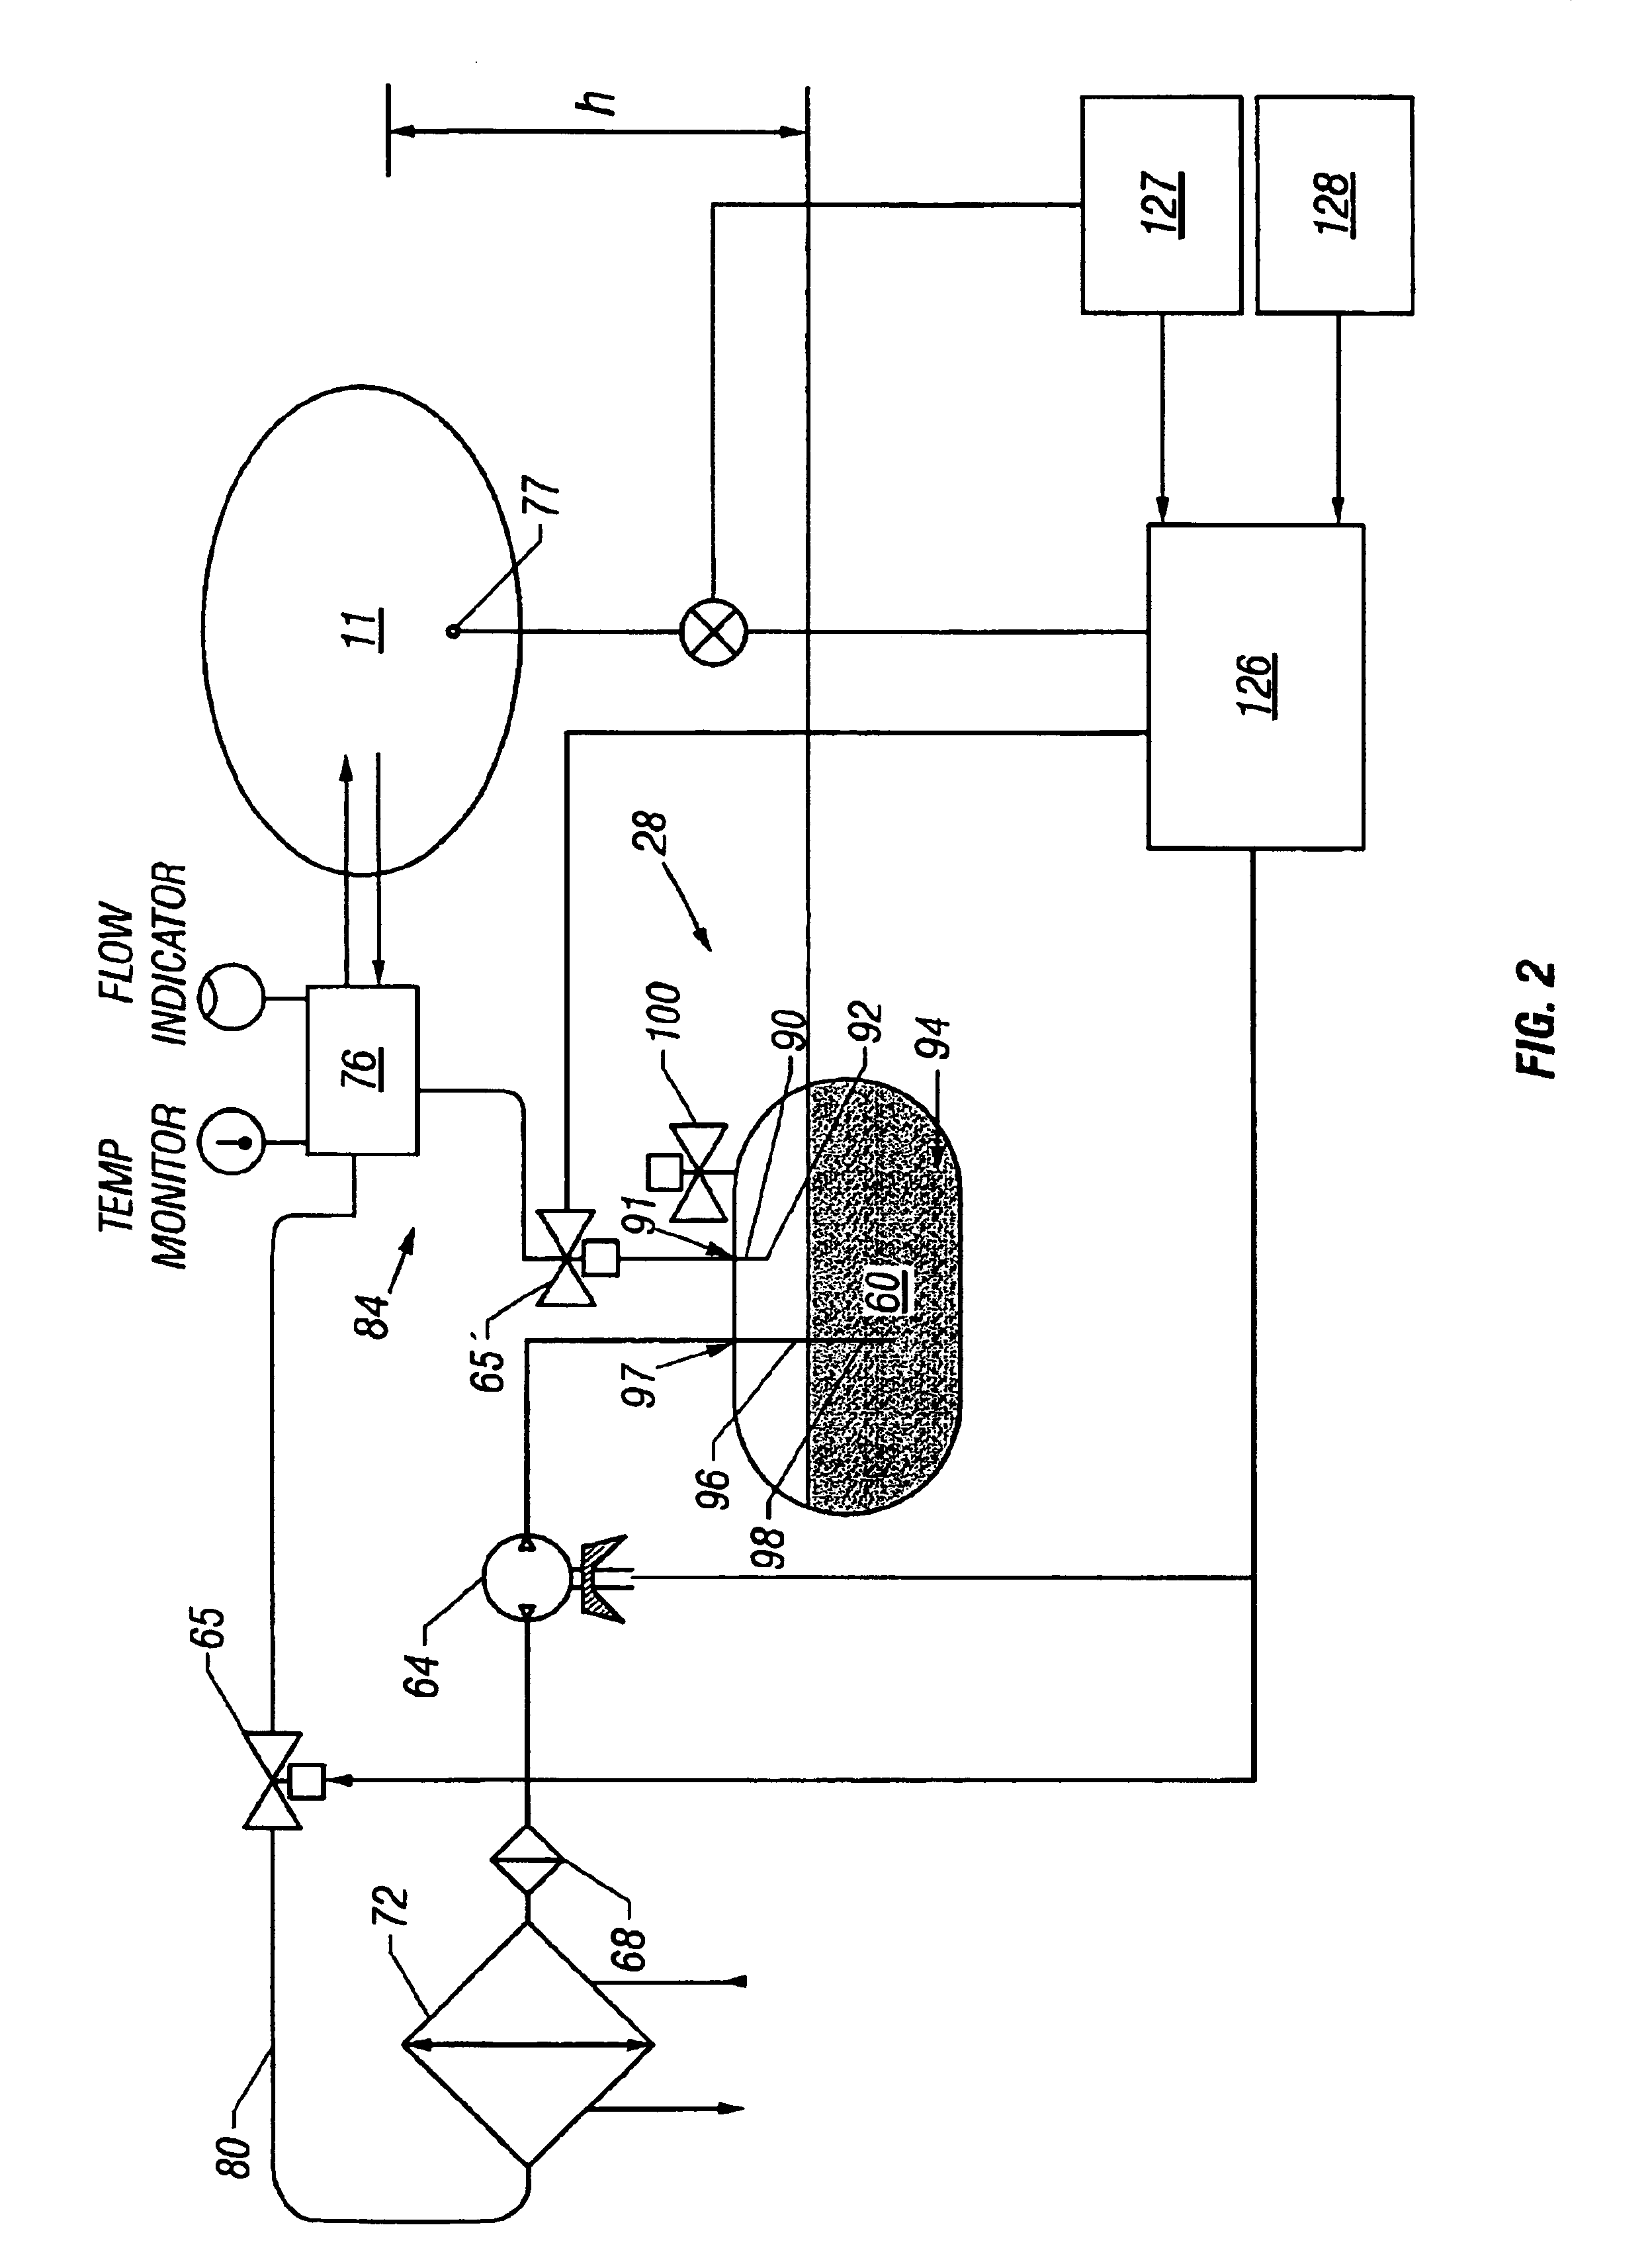 Method and apparatus for regulating patient temperature by irrigating the bladder with a fluid